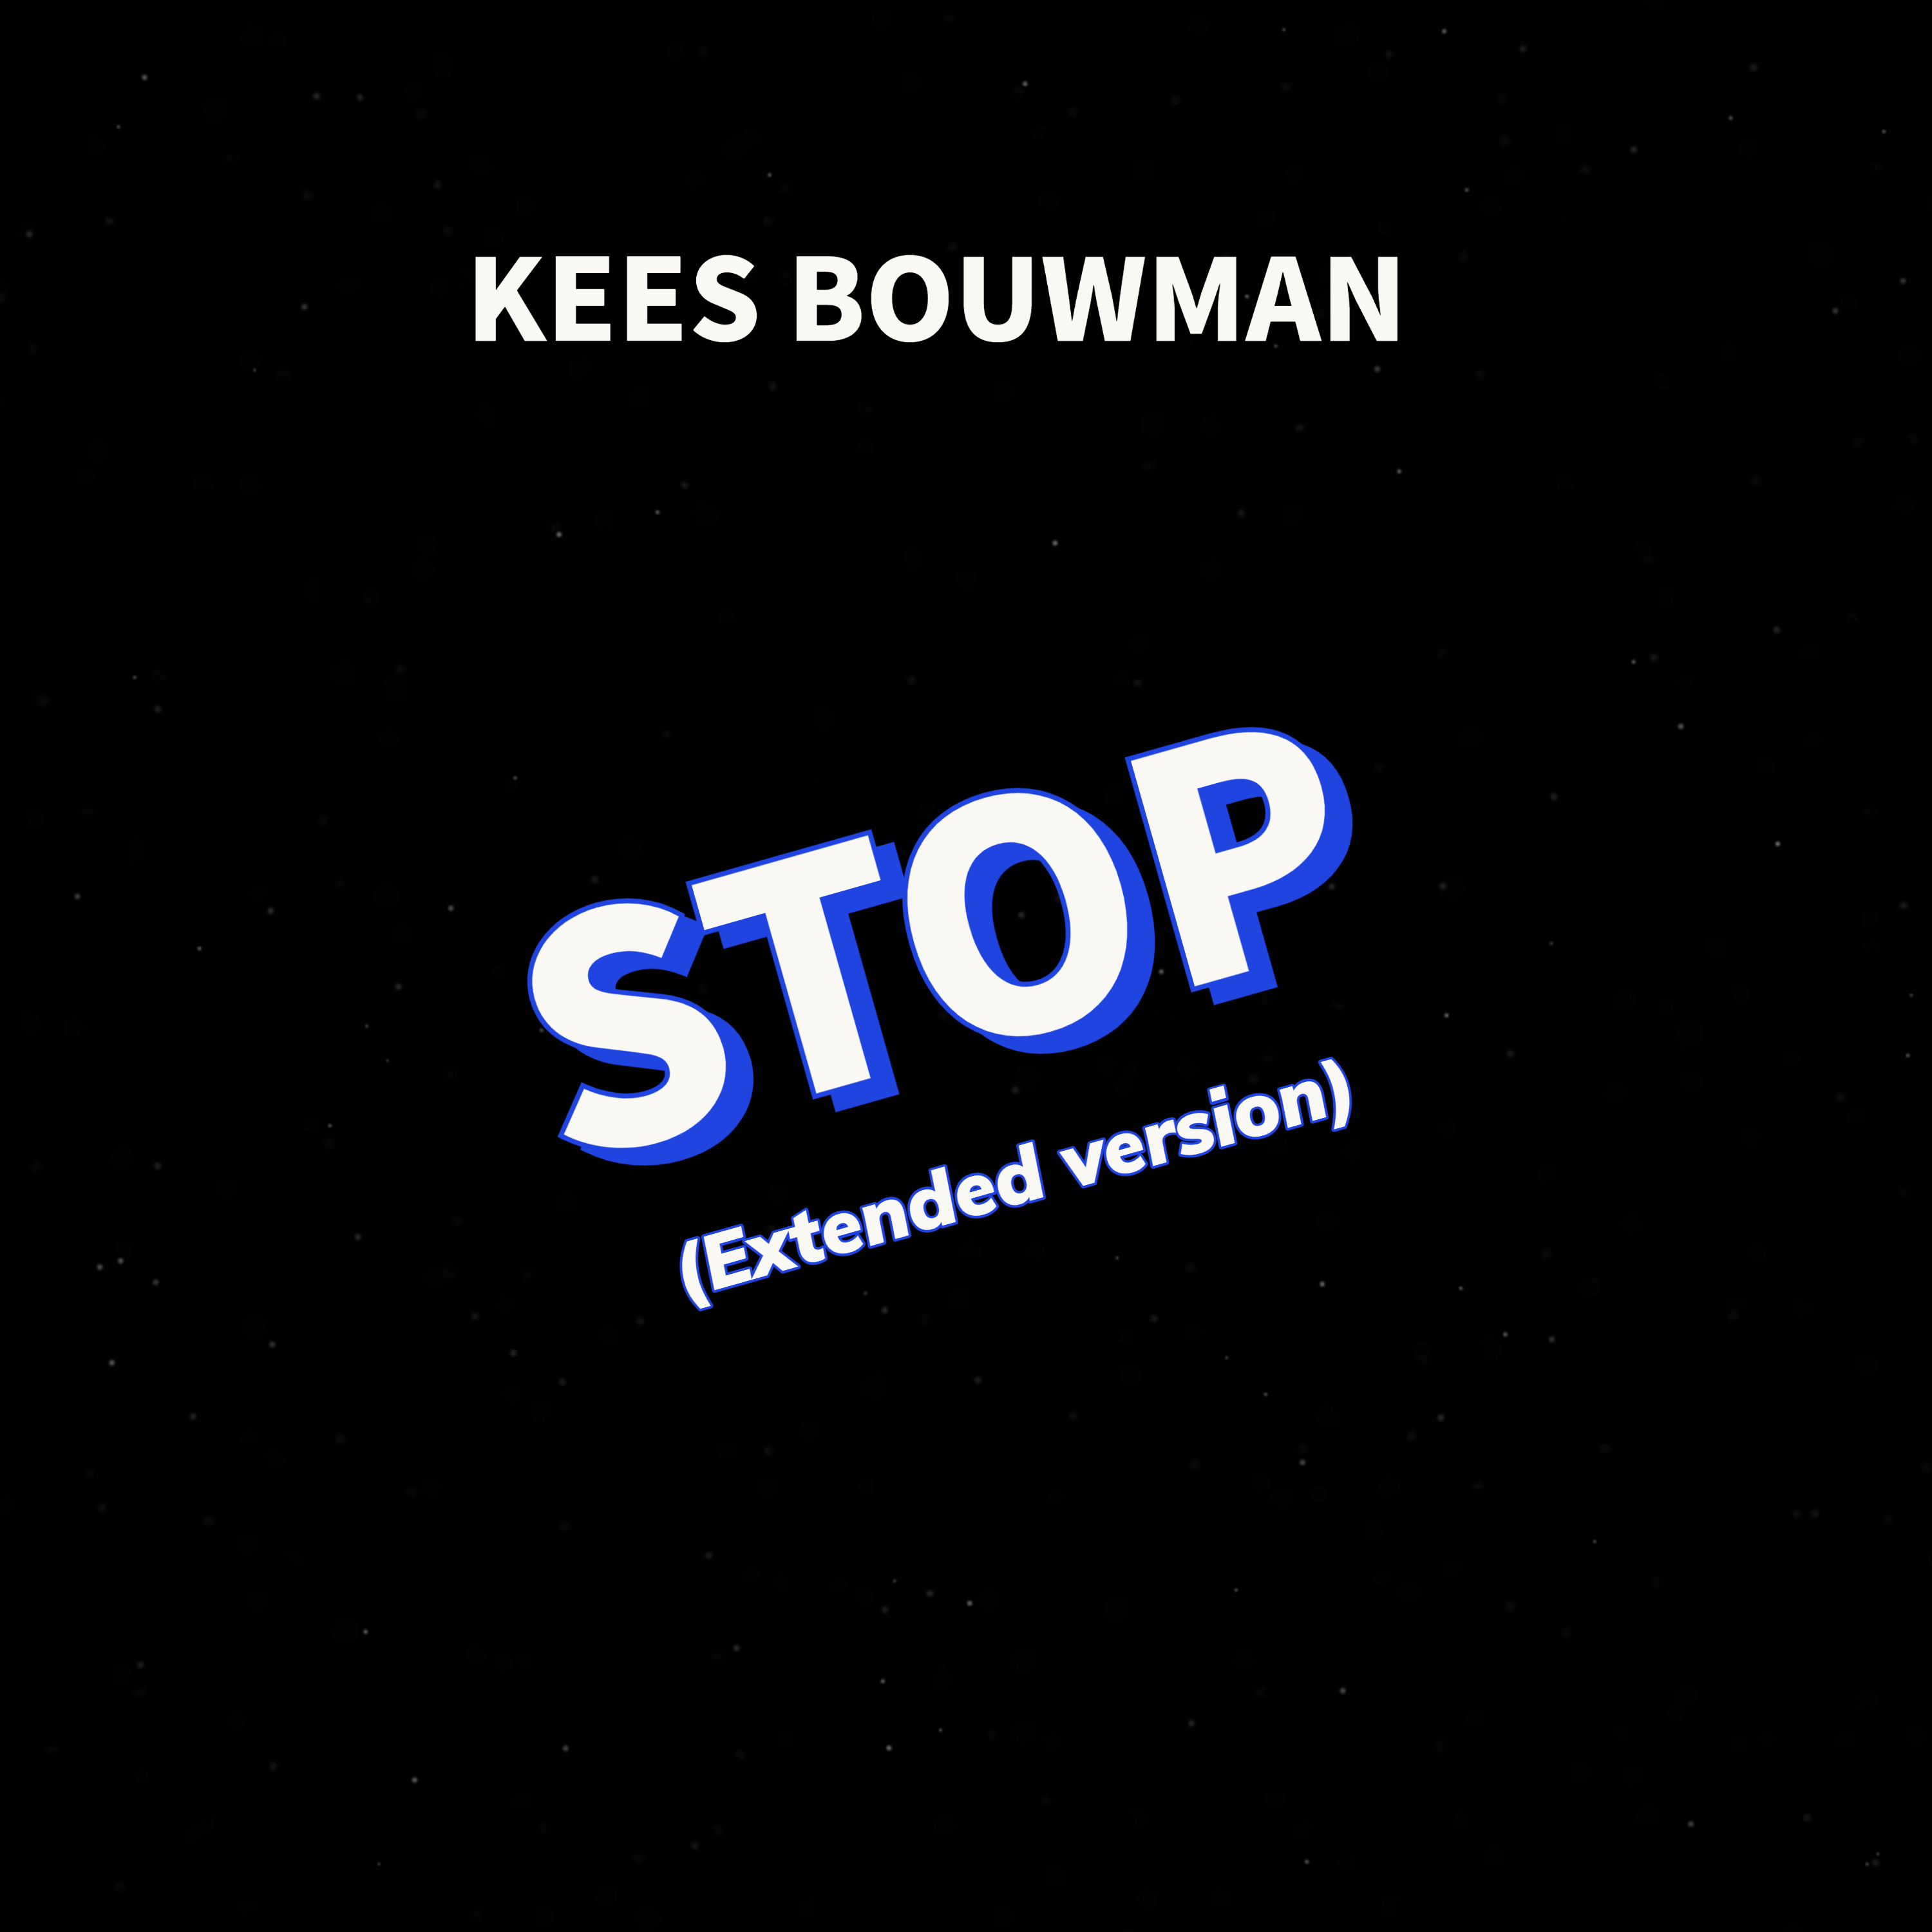 Stop (extended version